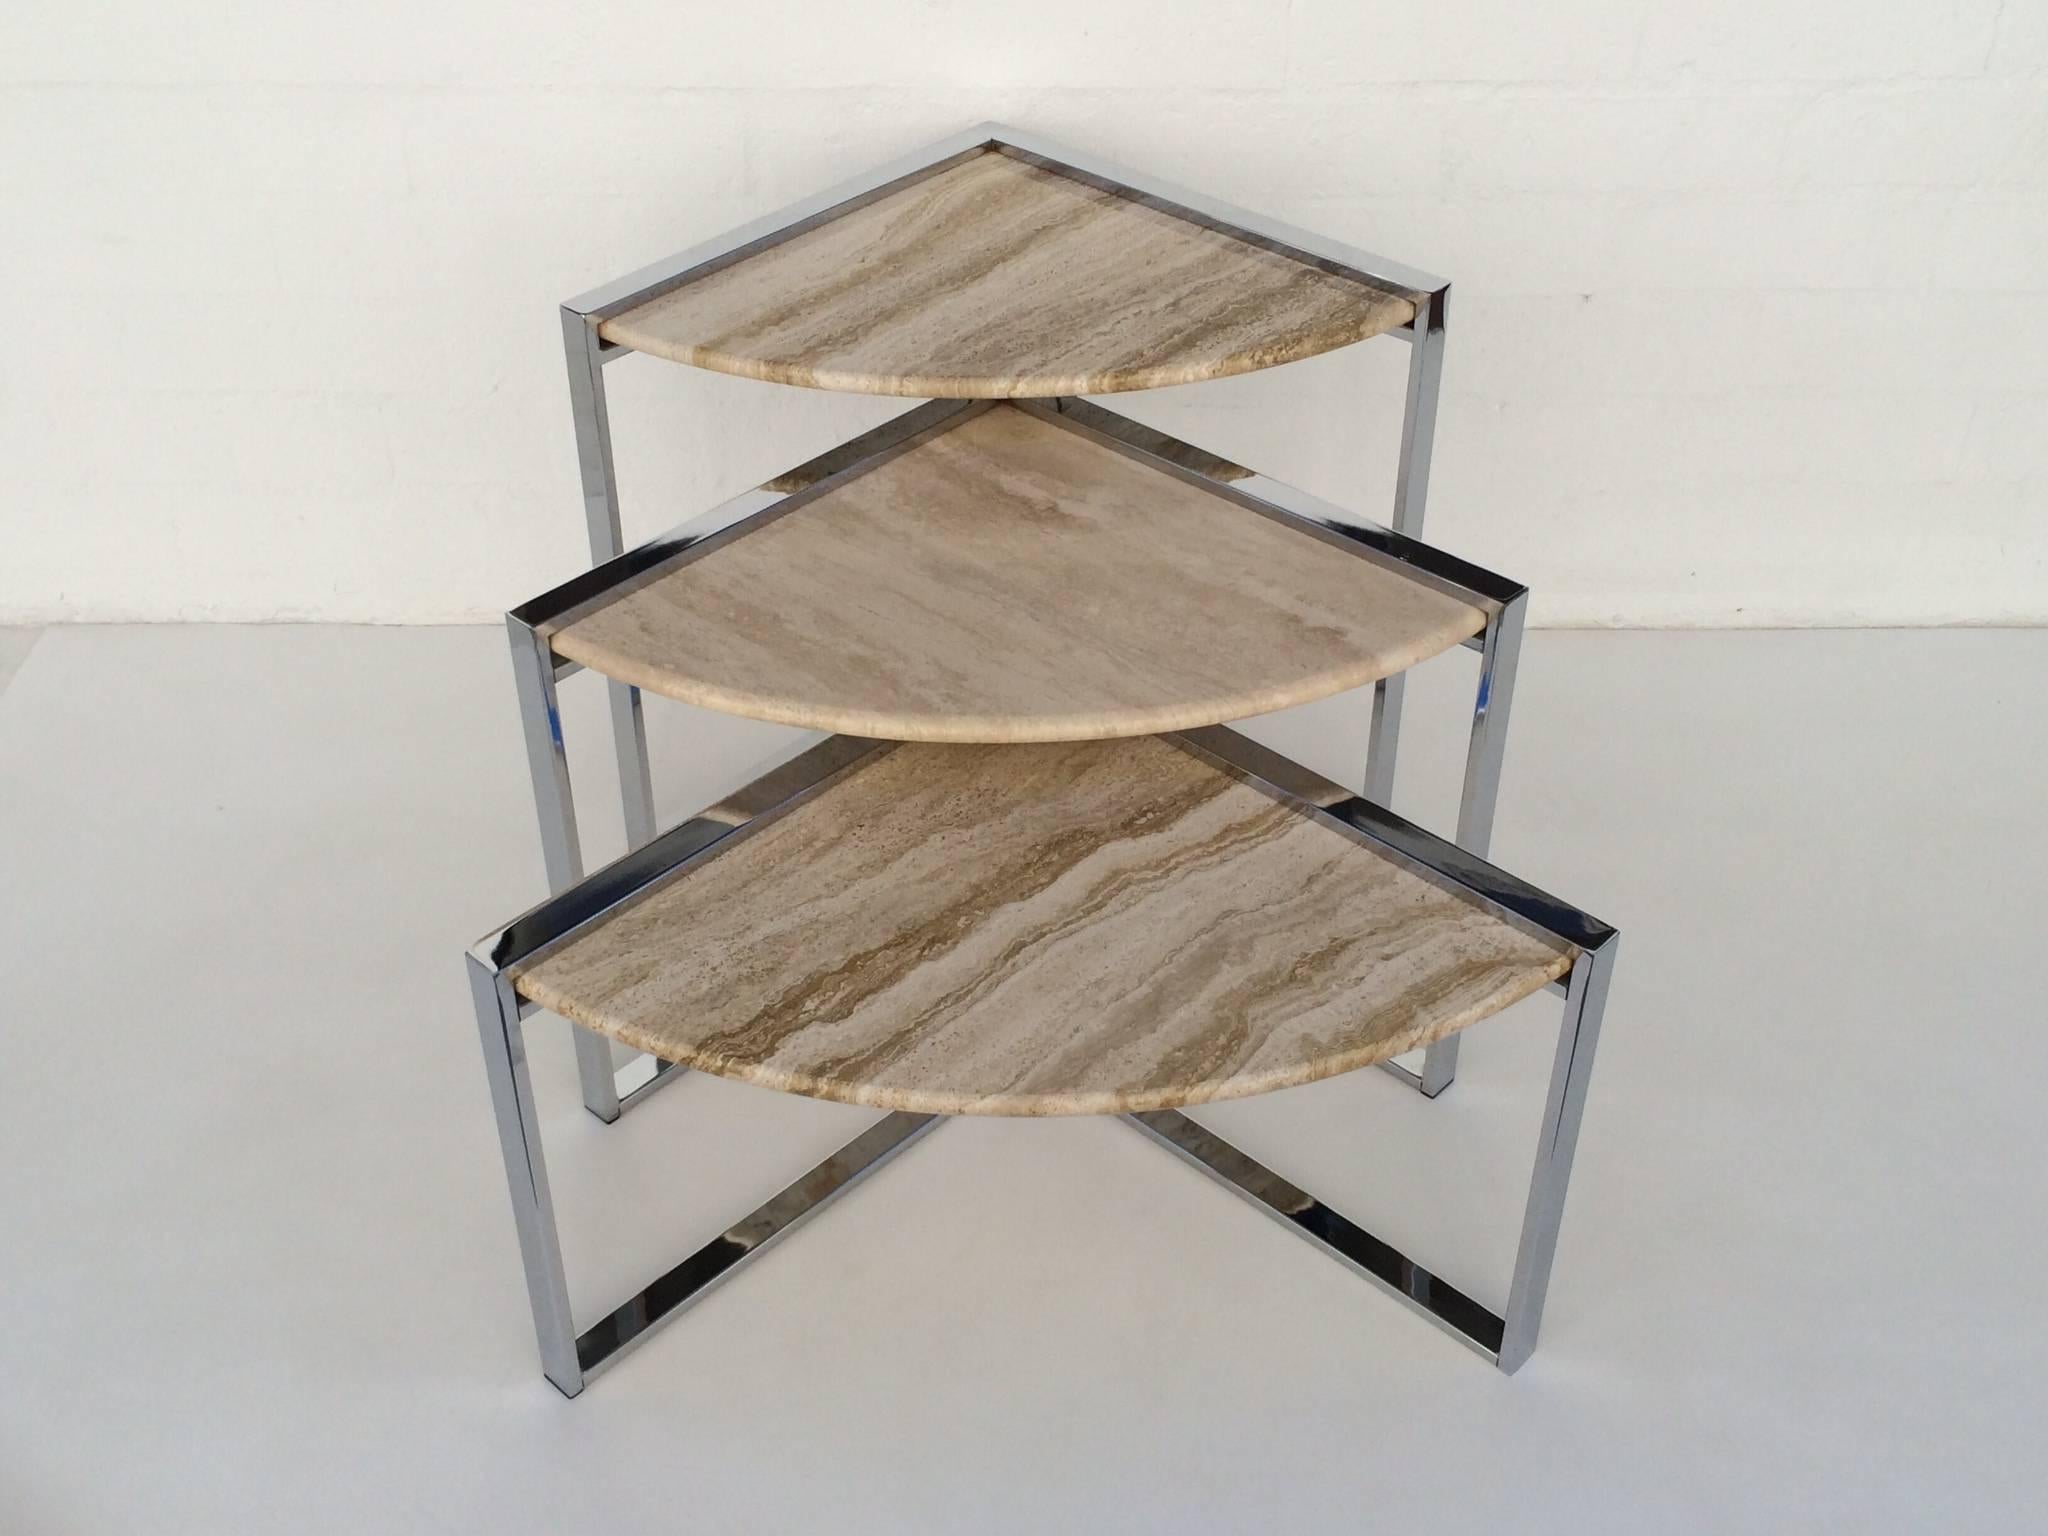 Three triangular nesting tables designed by Milo Baughman for Design Institute of America.
These tables consist of Italian travertine triangular tops and polished chrome bases.
Retain the DIA label.
Measures: 22